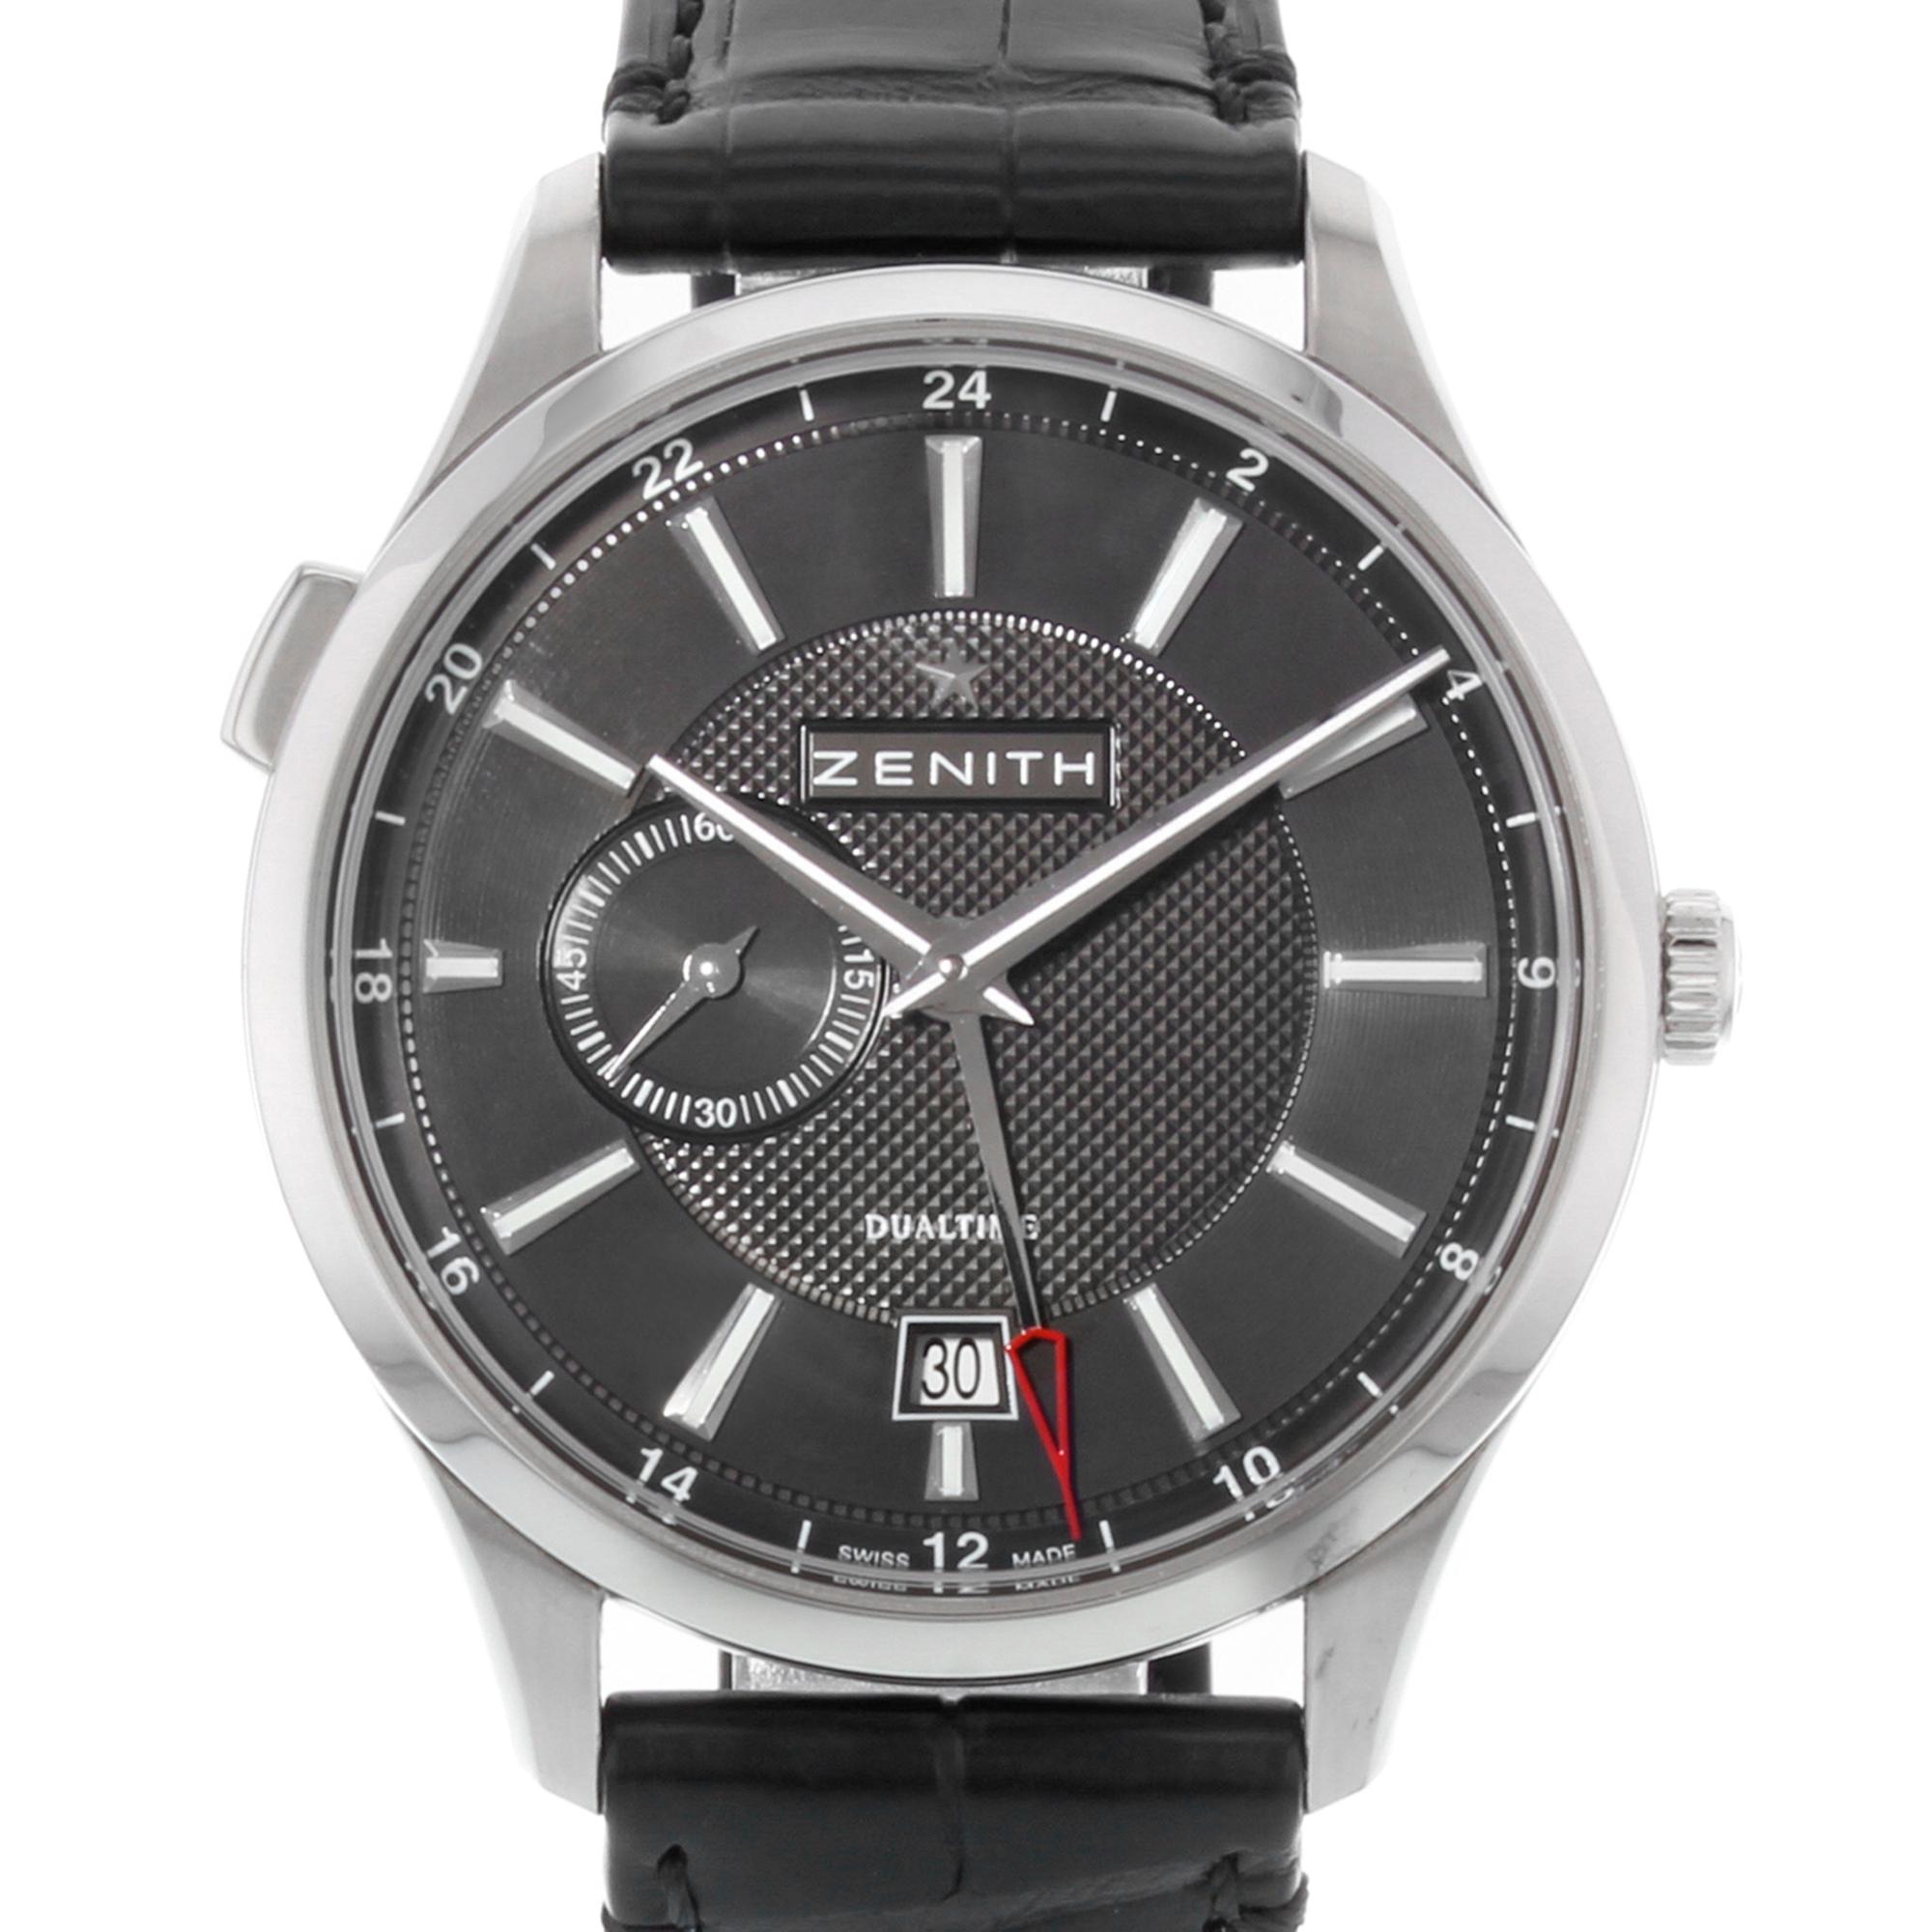 This brand new Zenith Captain 03.2130.682/22.C493 is a beautiful men's timepiece that is powered by an automatic movement which is cased in a stainless steel case. It has a round shape face, date, dual time, small seconds subdial dial and has hand